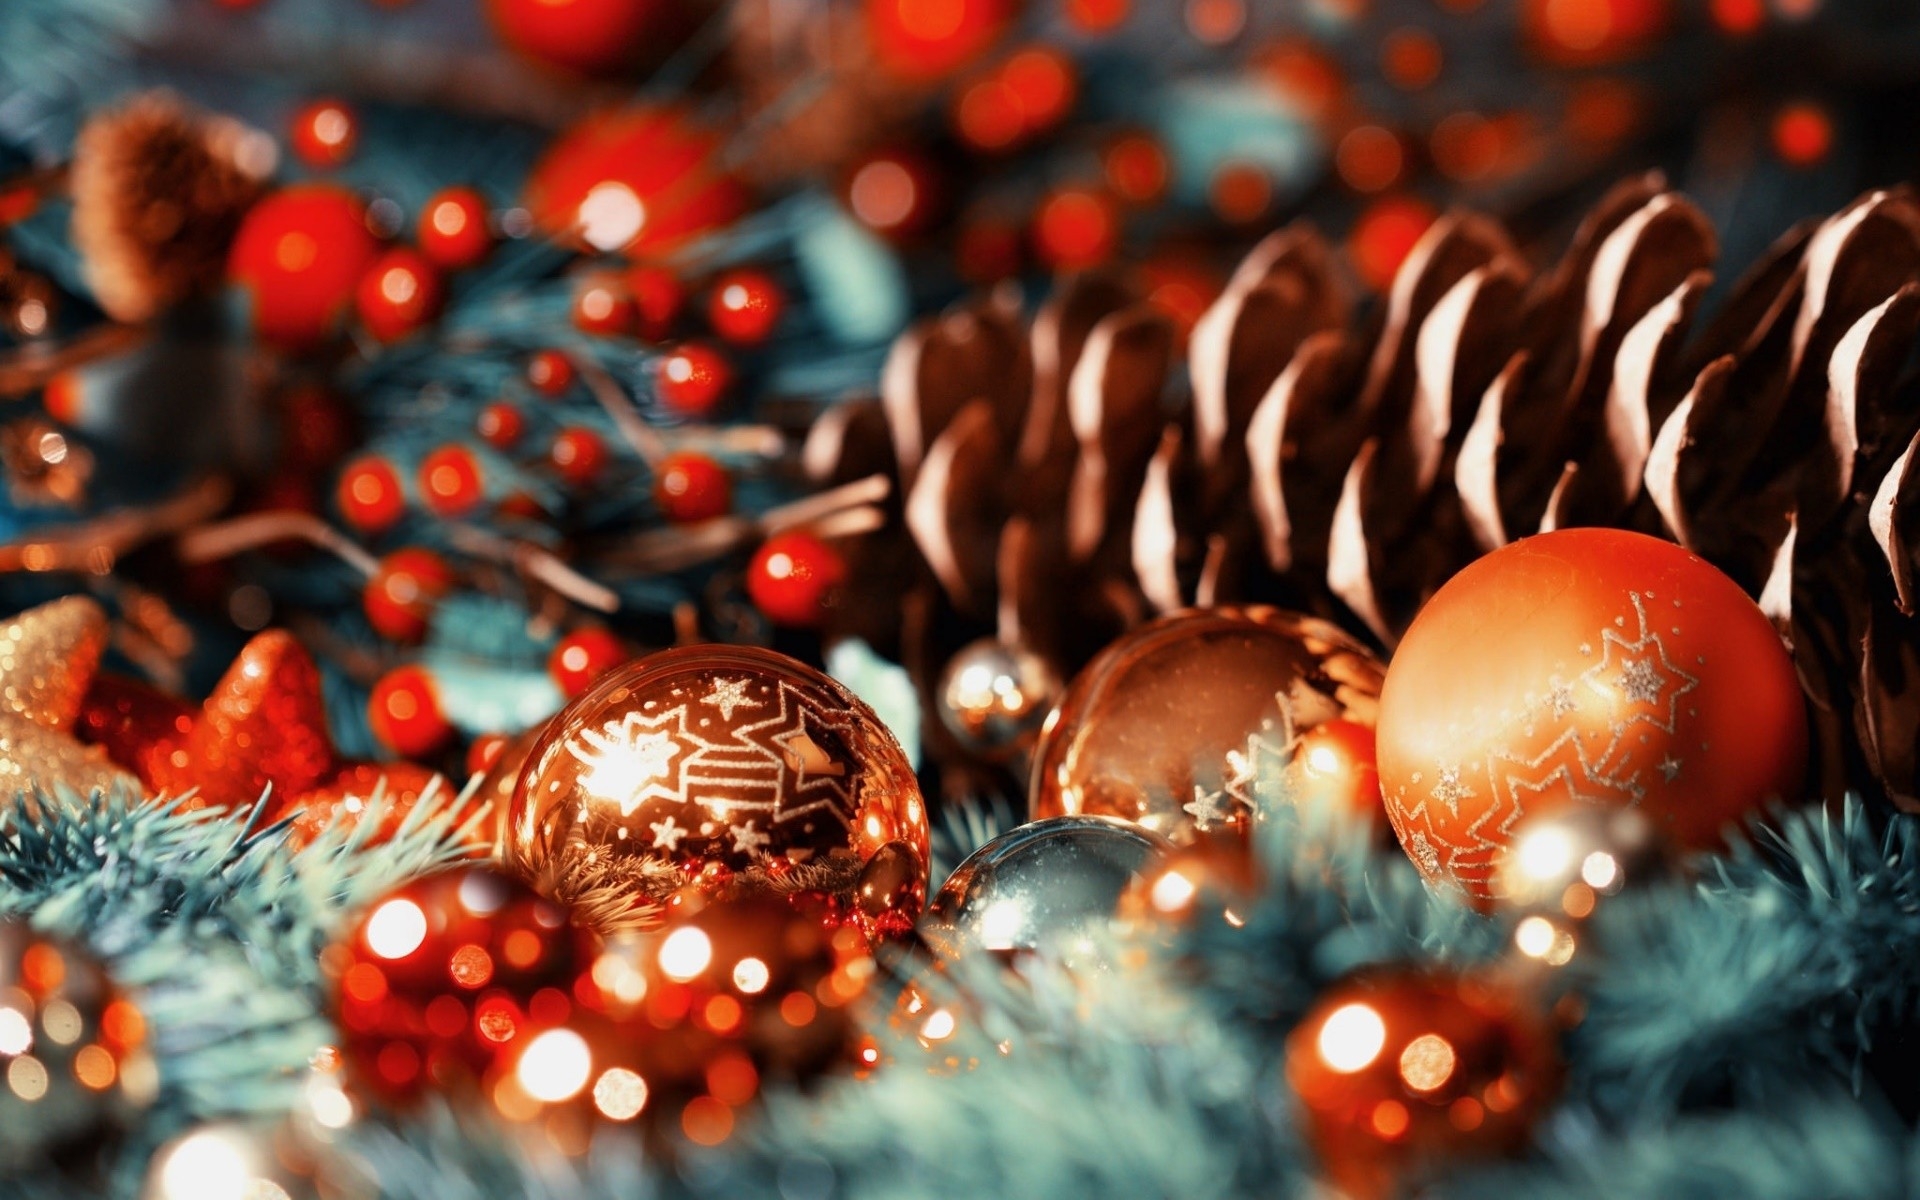 Wallpapers christmas decorations ornaments close on the desktop